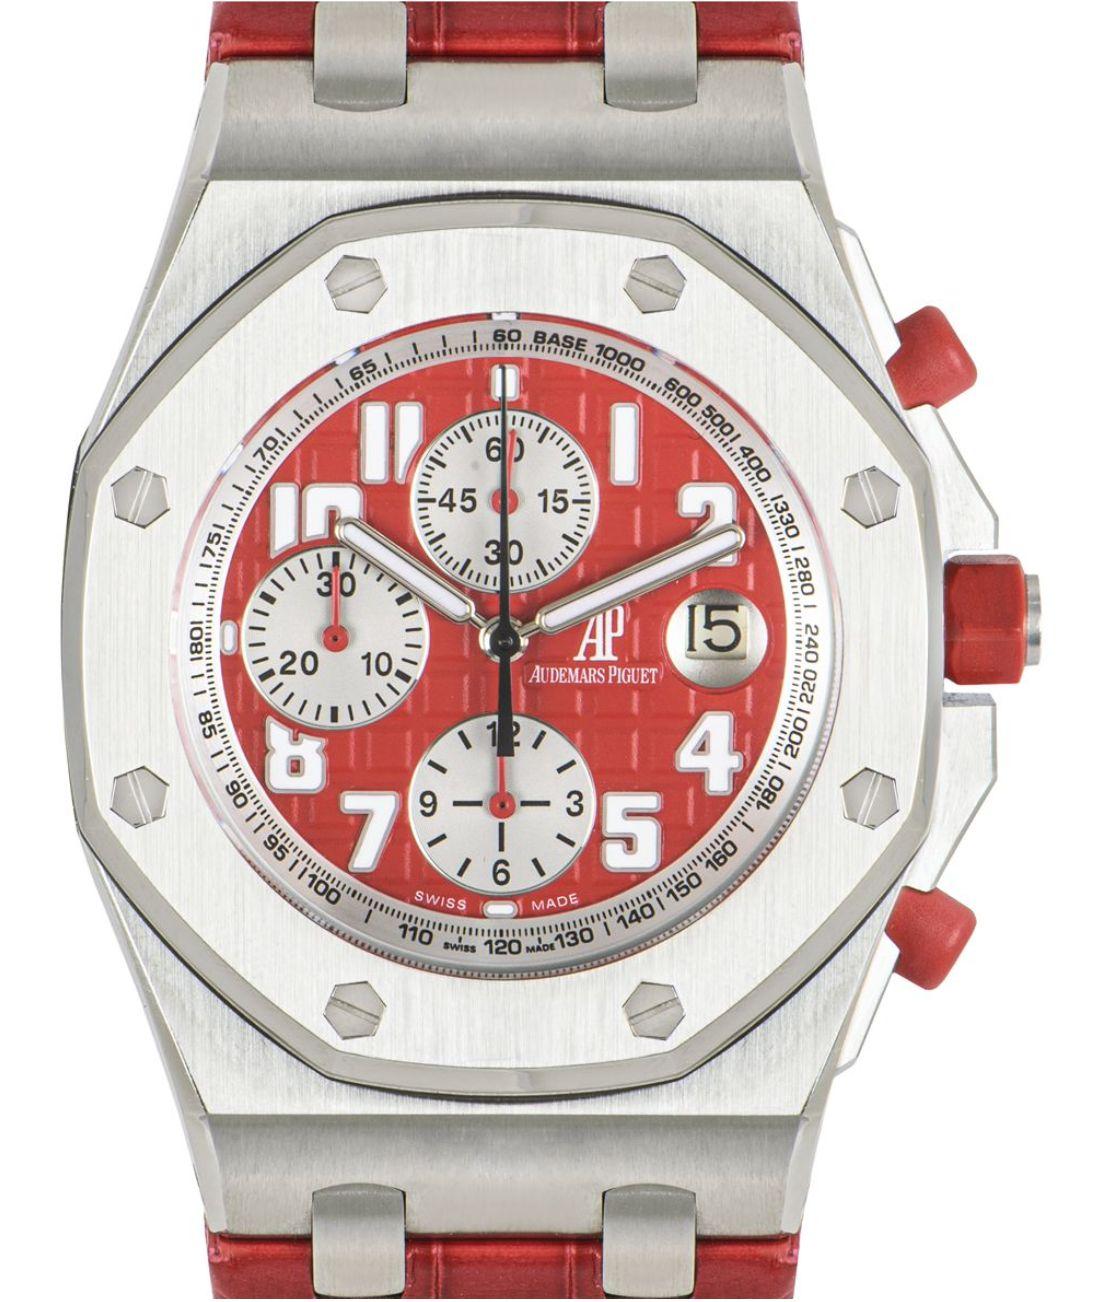 A stunning men's limited edition Royal Oak Offshore Rhone Fusterie in stainless steel by Audemars Piguet. Featuring a distinctive red grande tapisserie dial with 3 subdials displaying a 60 second, 30 minute, 12-hour marker, and a date aperture at 3